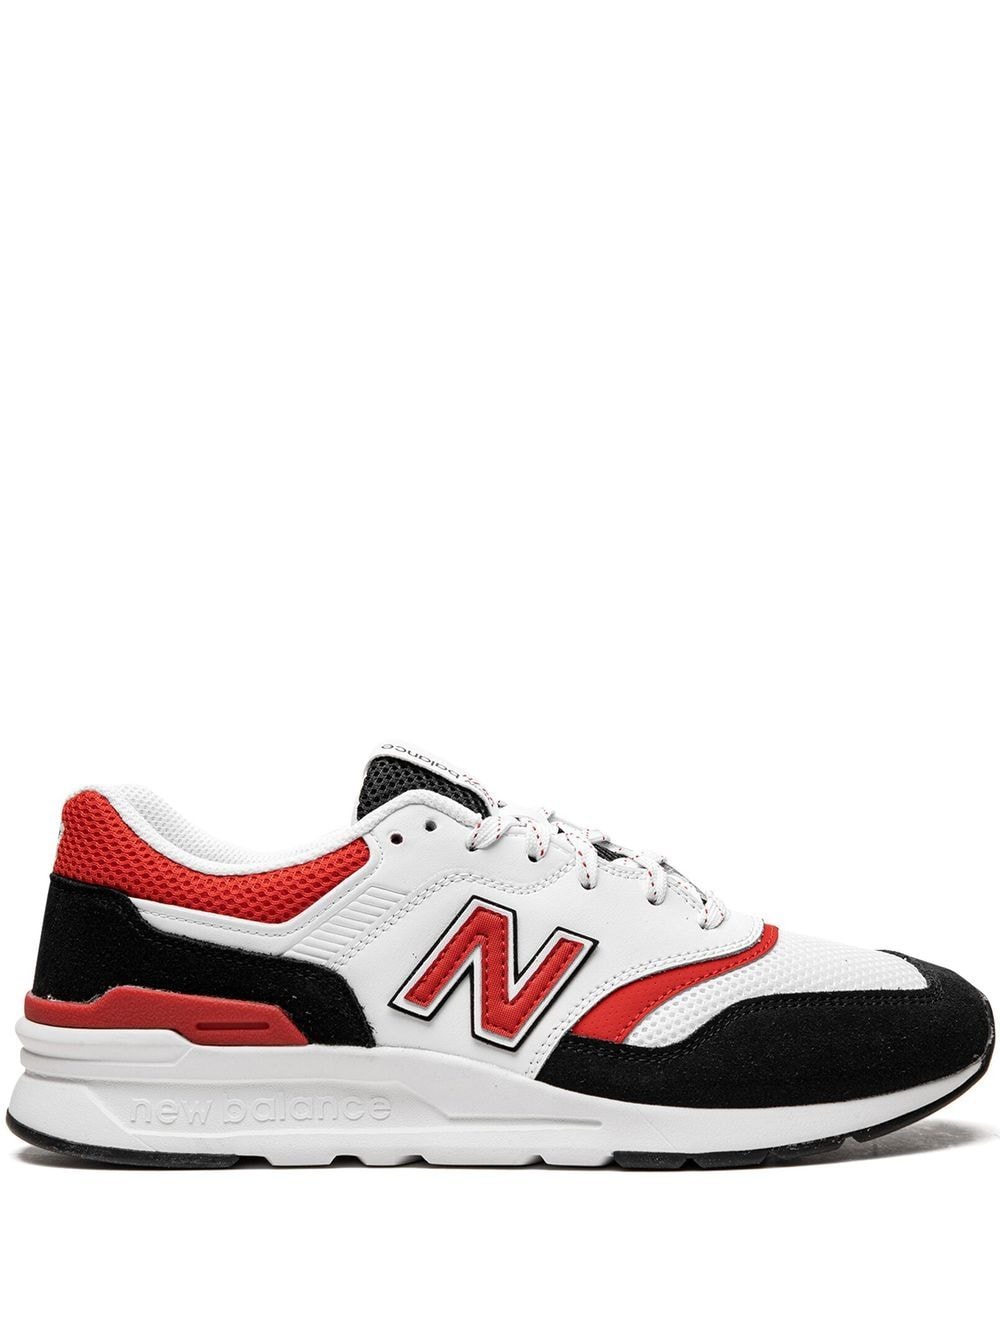 New Balance 997H low-top lace-up sneakers - White